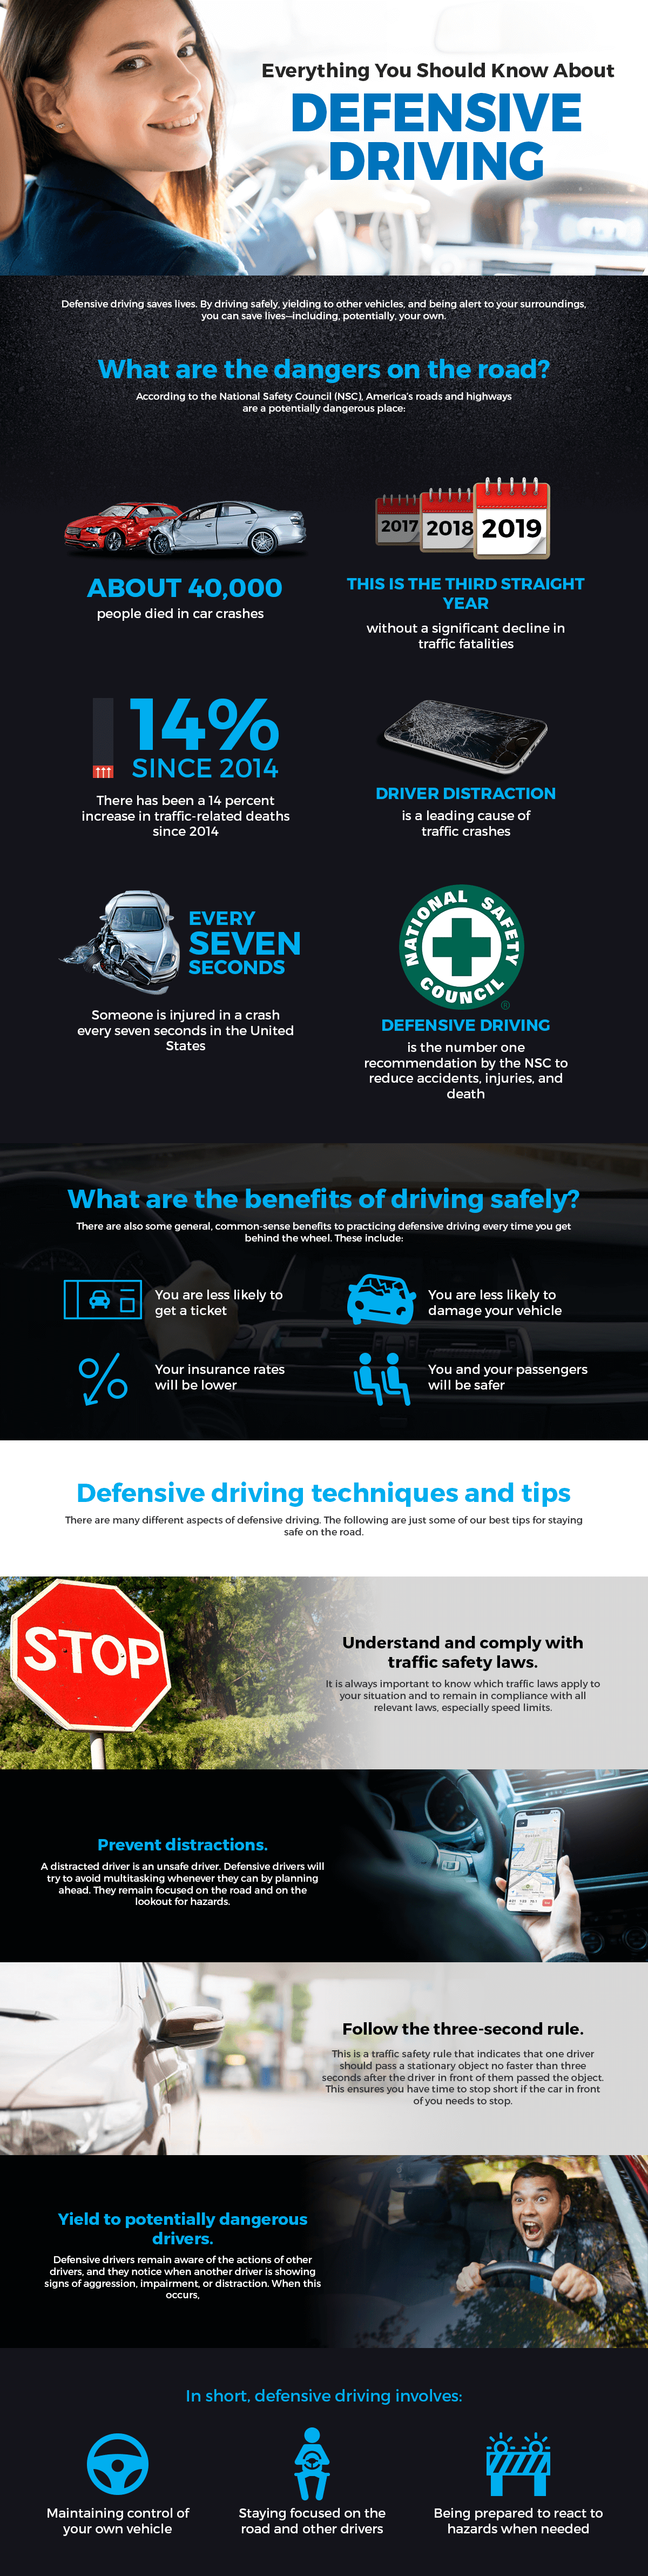 defensive driving infographic